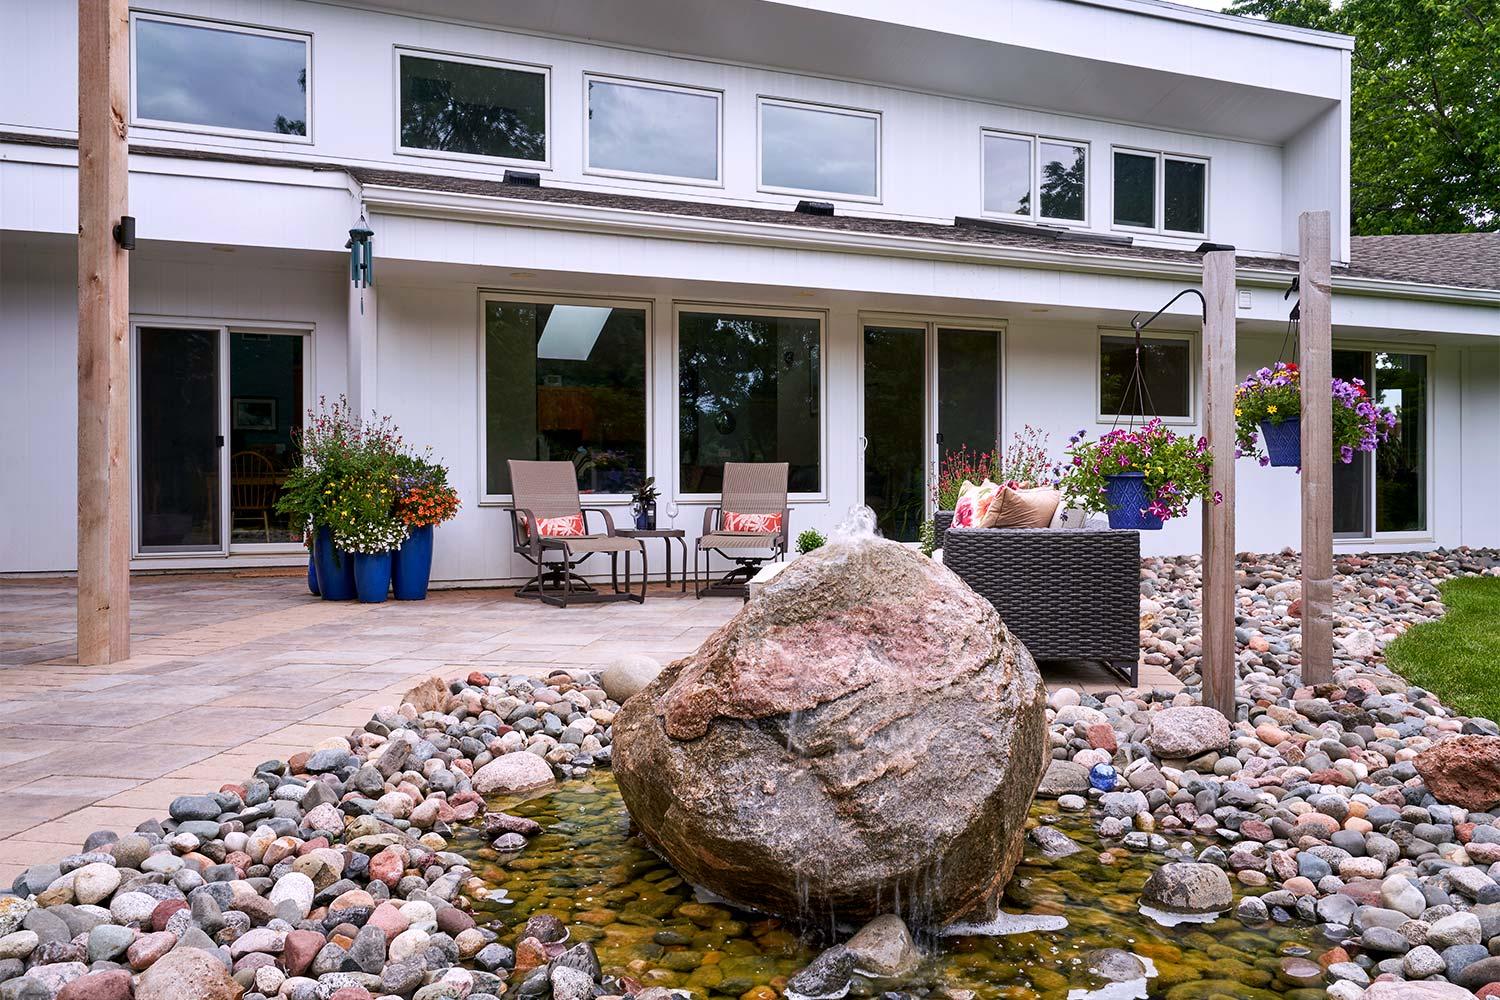 Statement water feature created from a boulder, placed in a river of stone bordering the living patio.